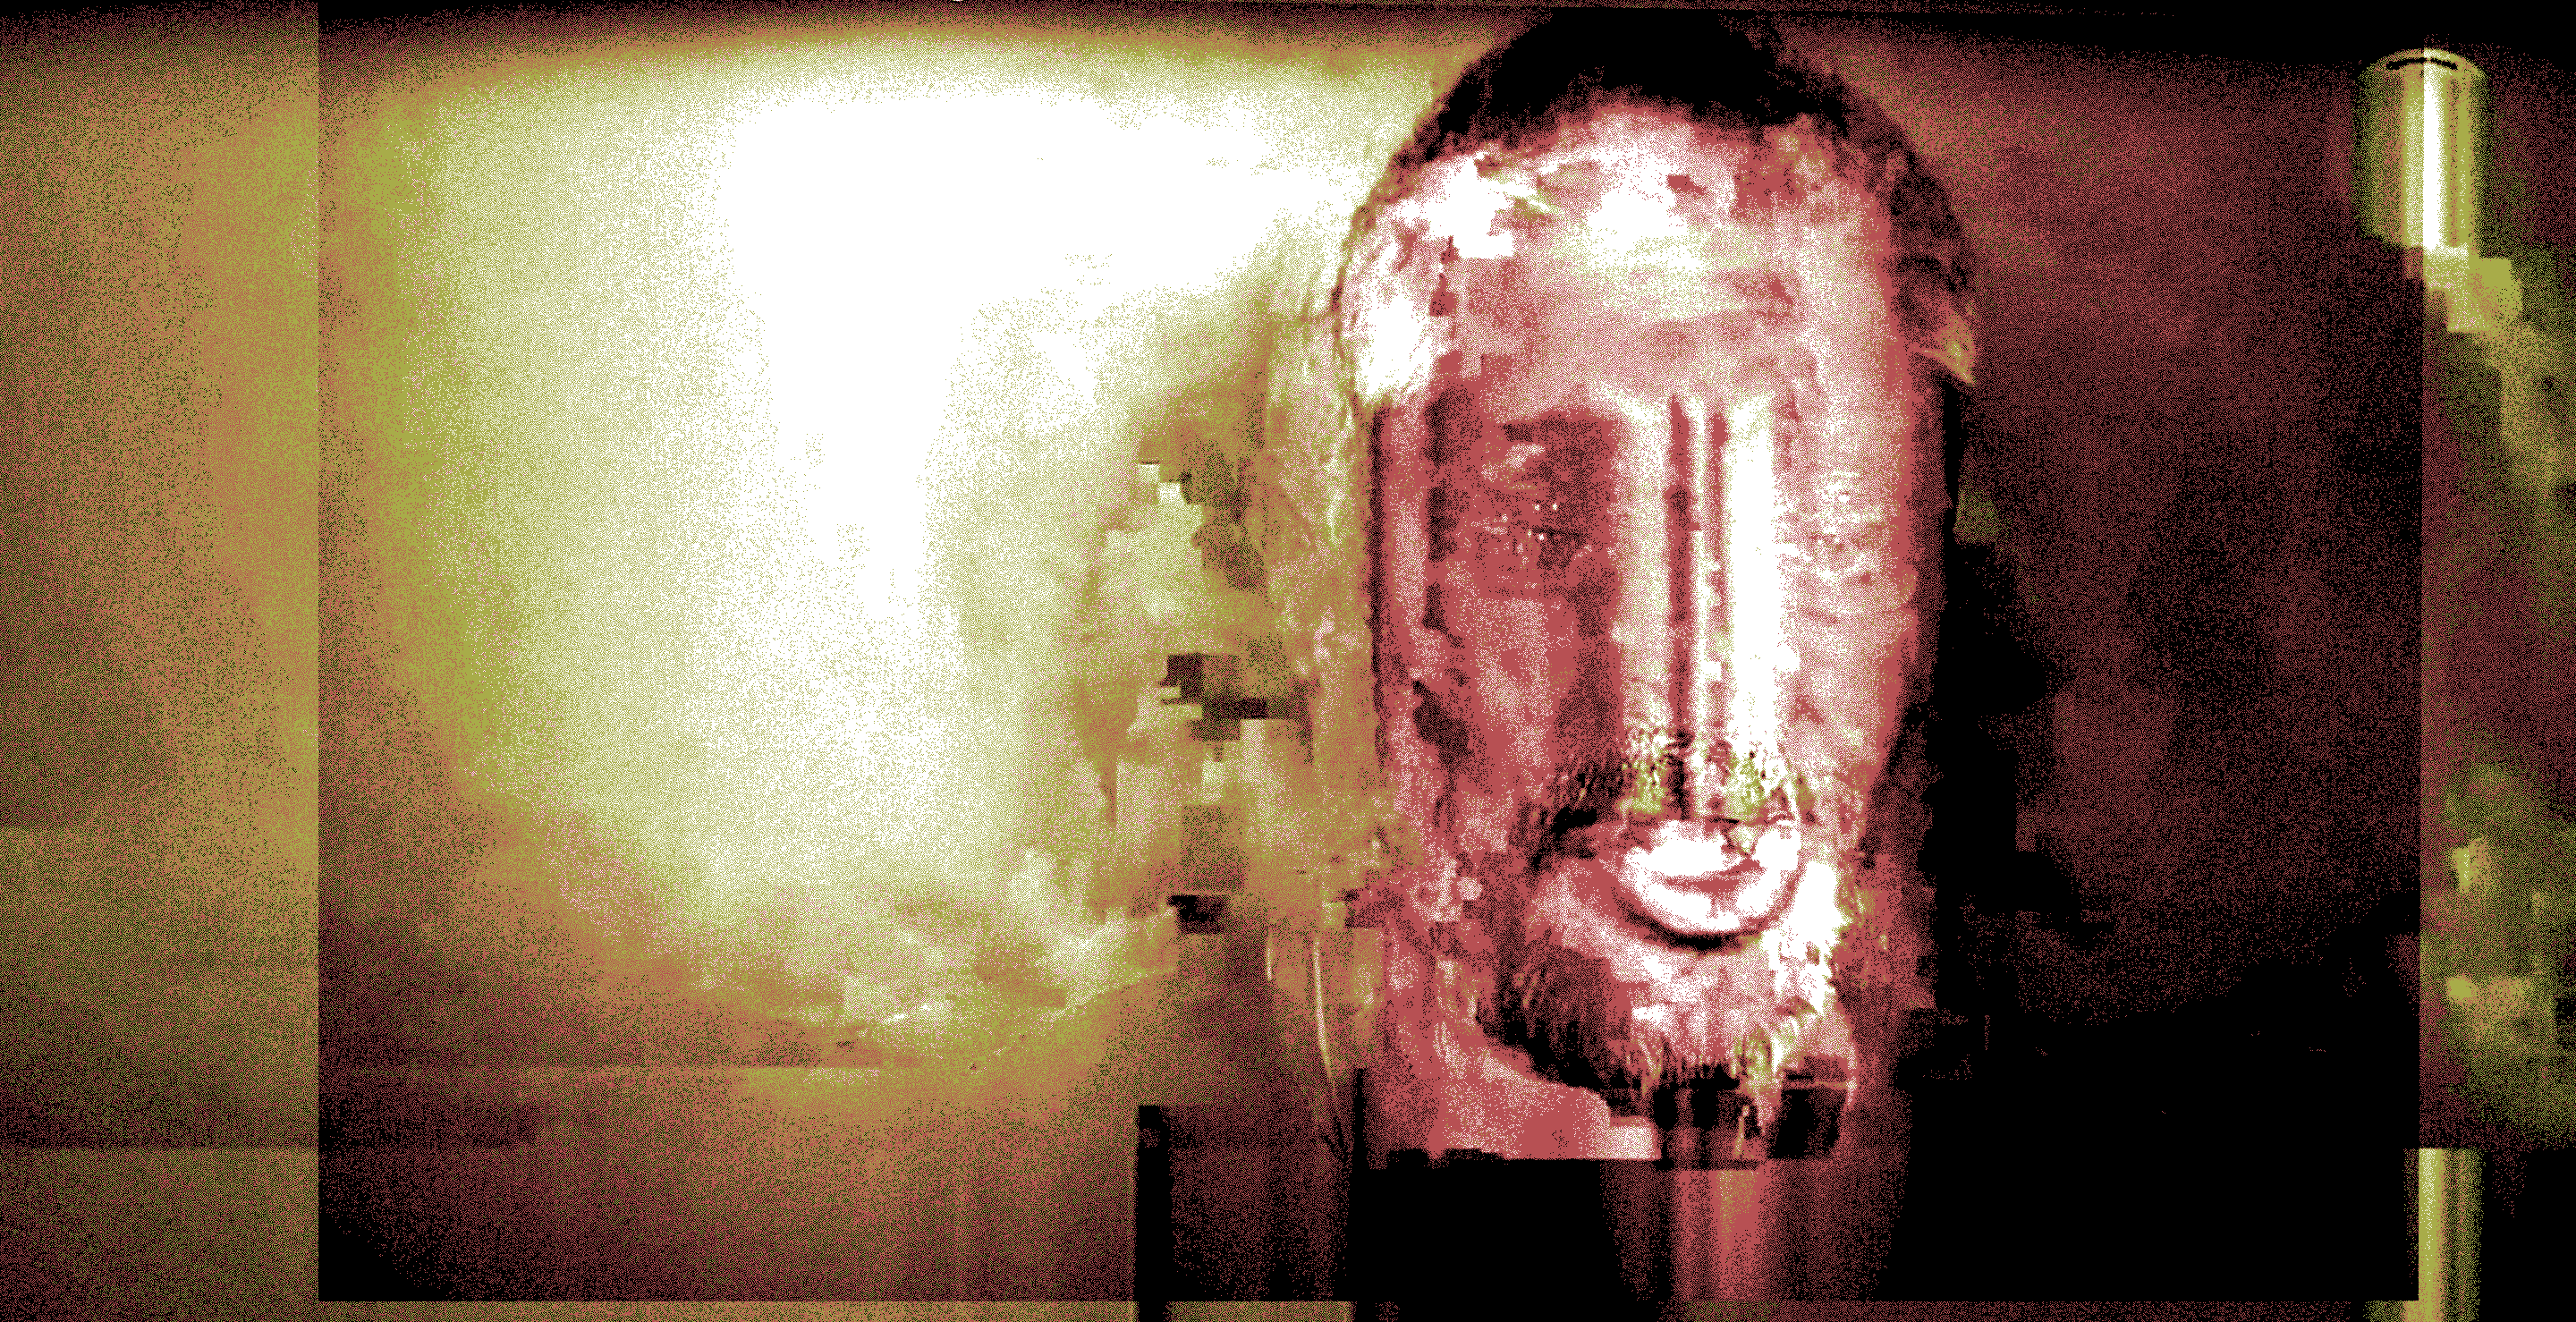 artifact glitched face of the late Dr. Rashid Buttar